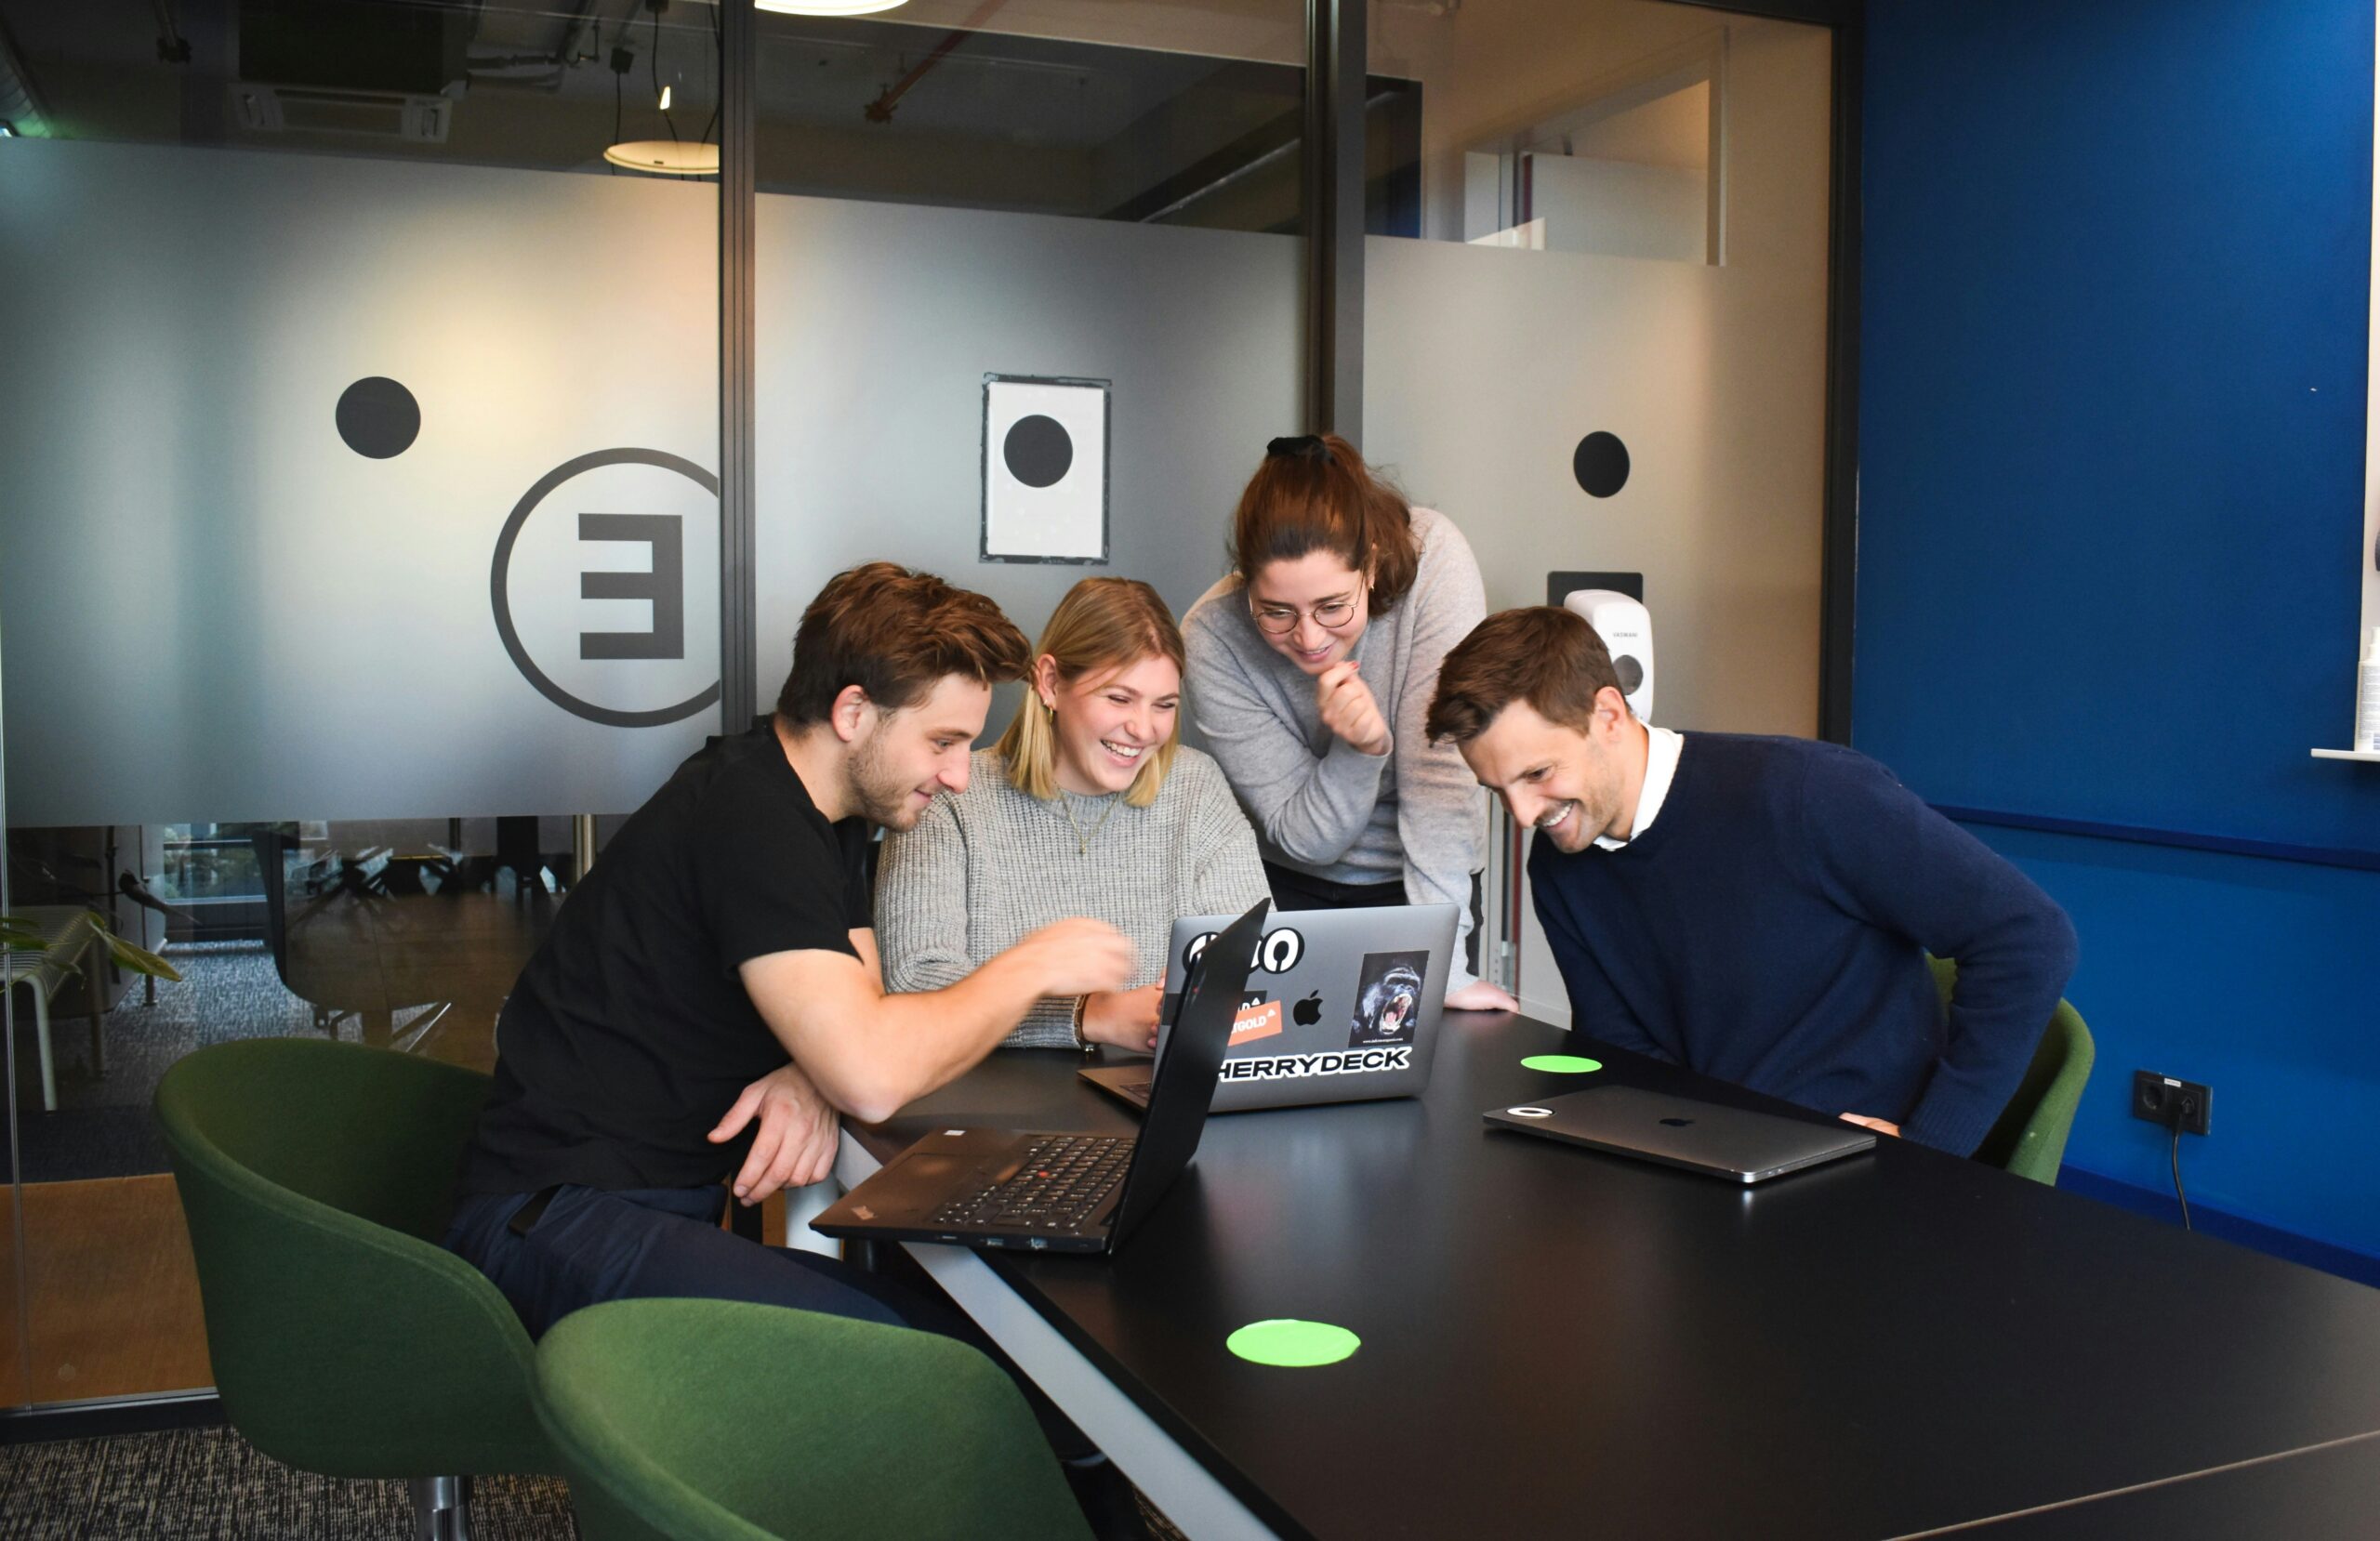 A group of five people are gathered around a laptop in an office setting, smiling and looking at the screen, perhaps discovering how to automate your business processes.